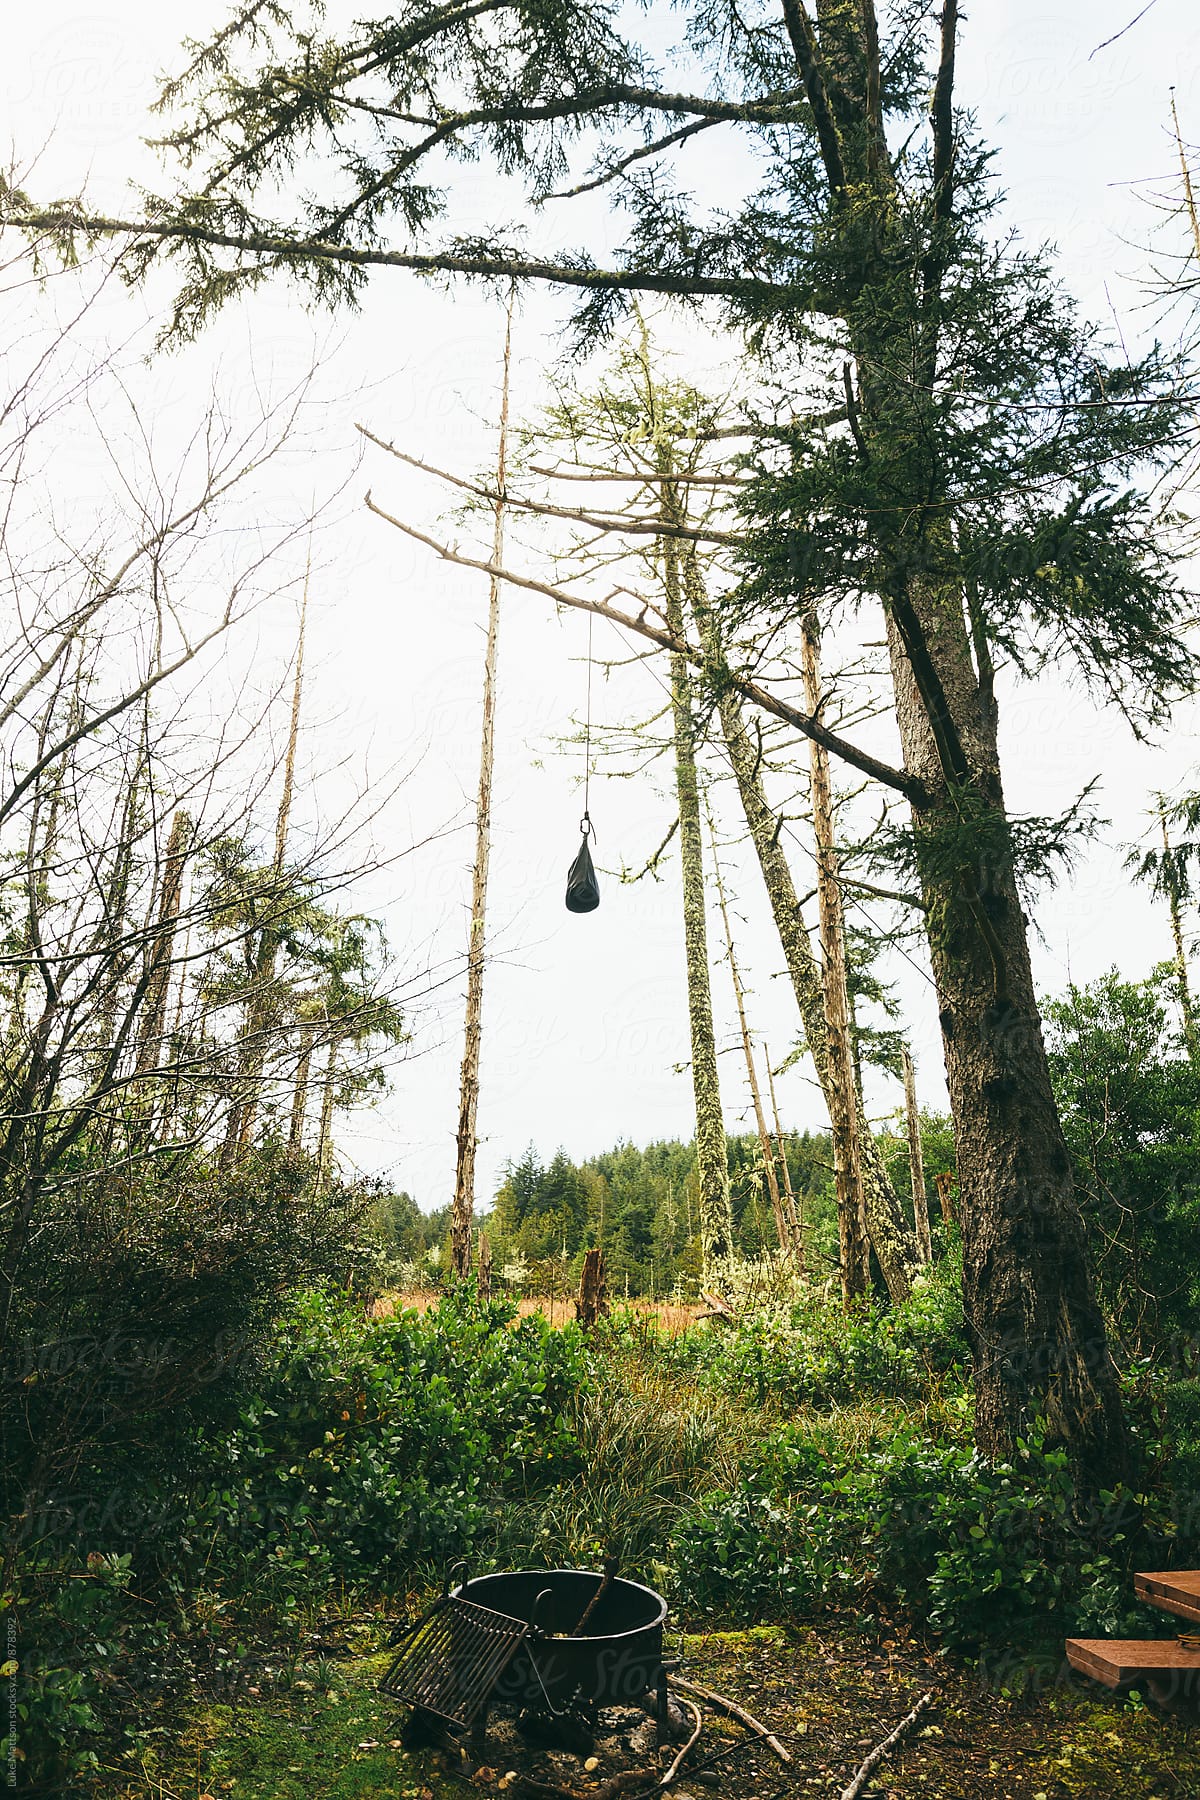 Bear Bag Hanging From Tree Branch